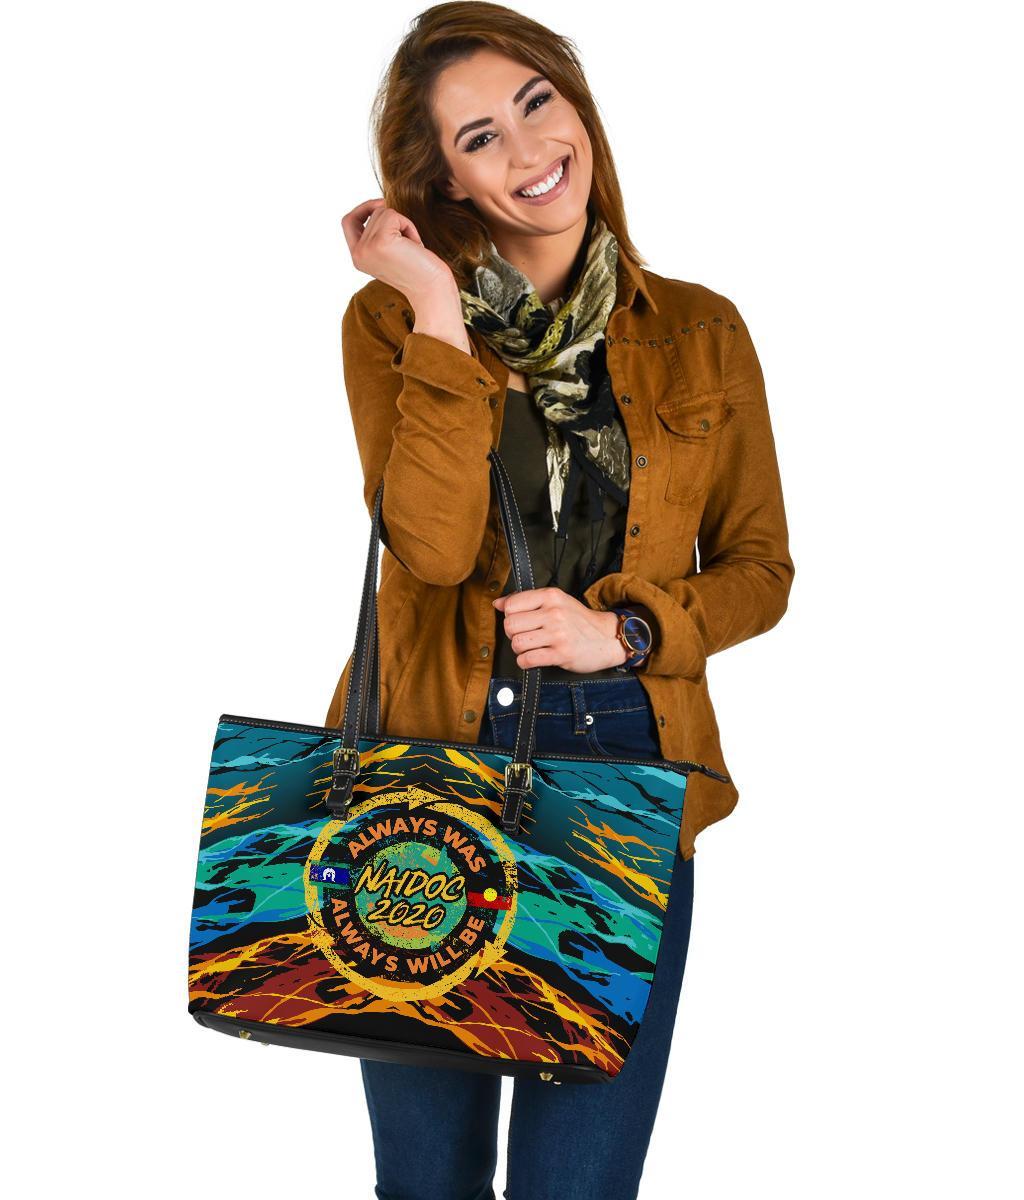 large-leather-tote-bag-naidoc-always-was-always-will-be